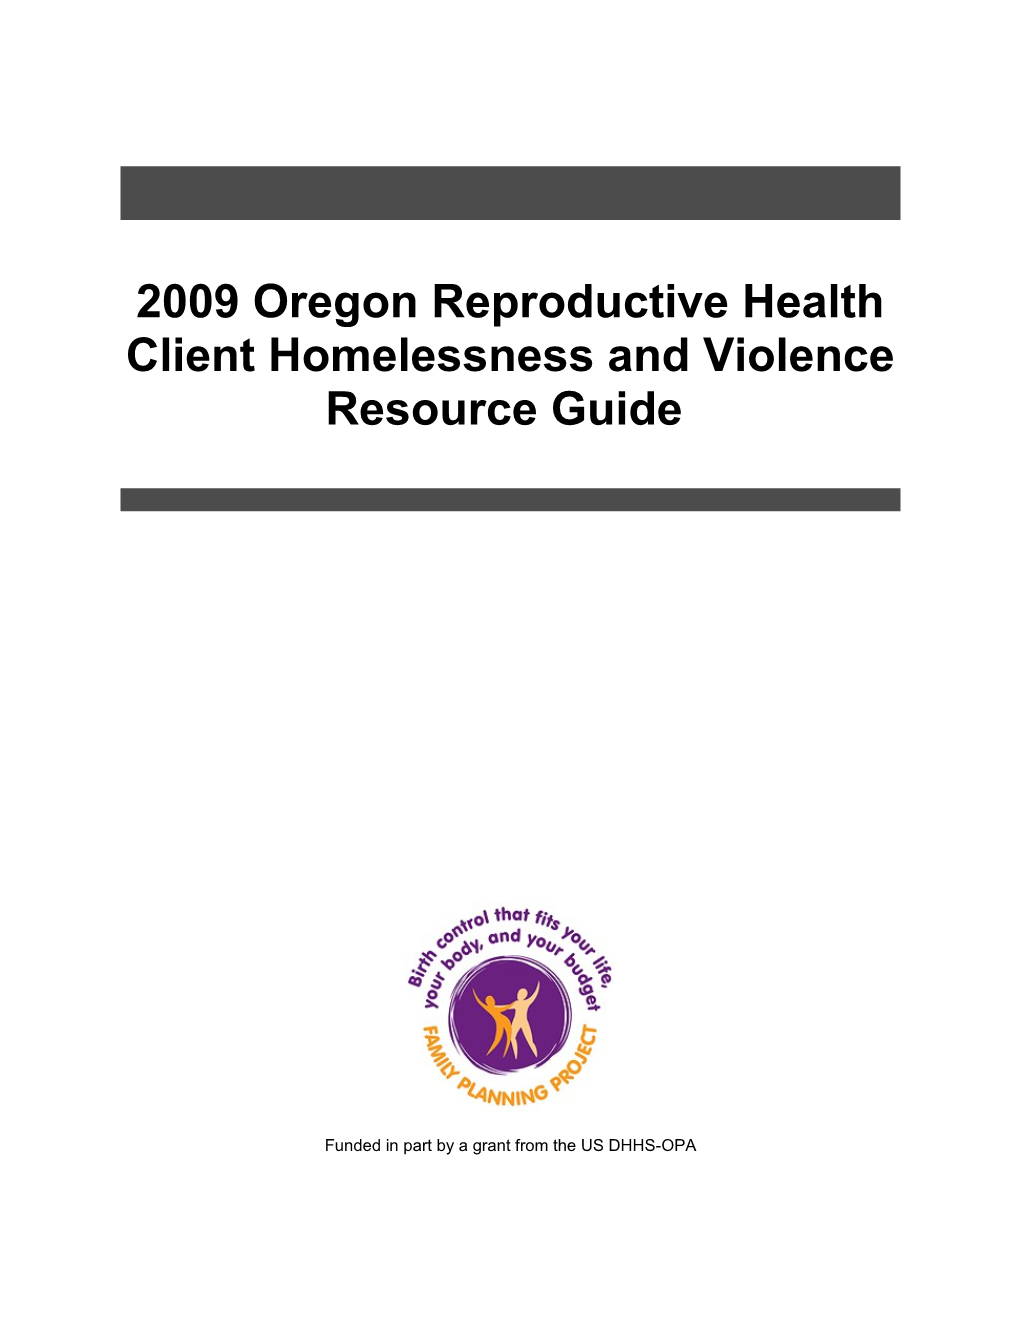 Family Planning Program - 2009 Oregon Reproductive Health Client Homelessness and Violence